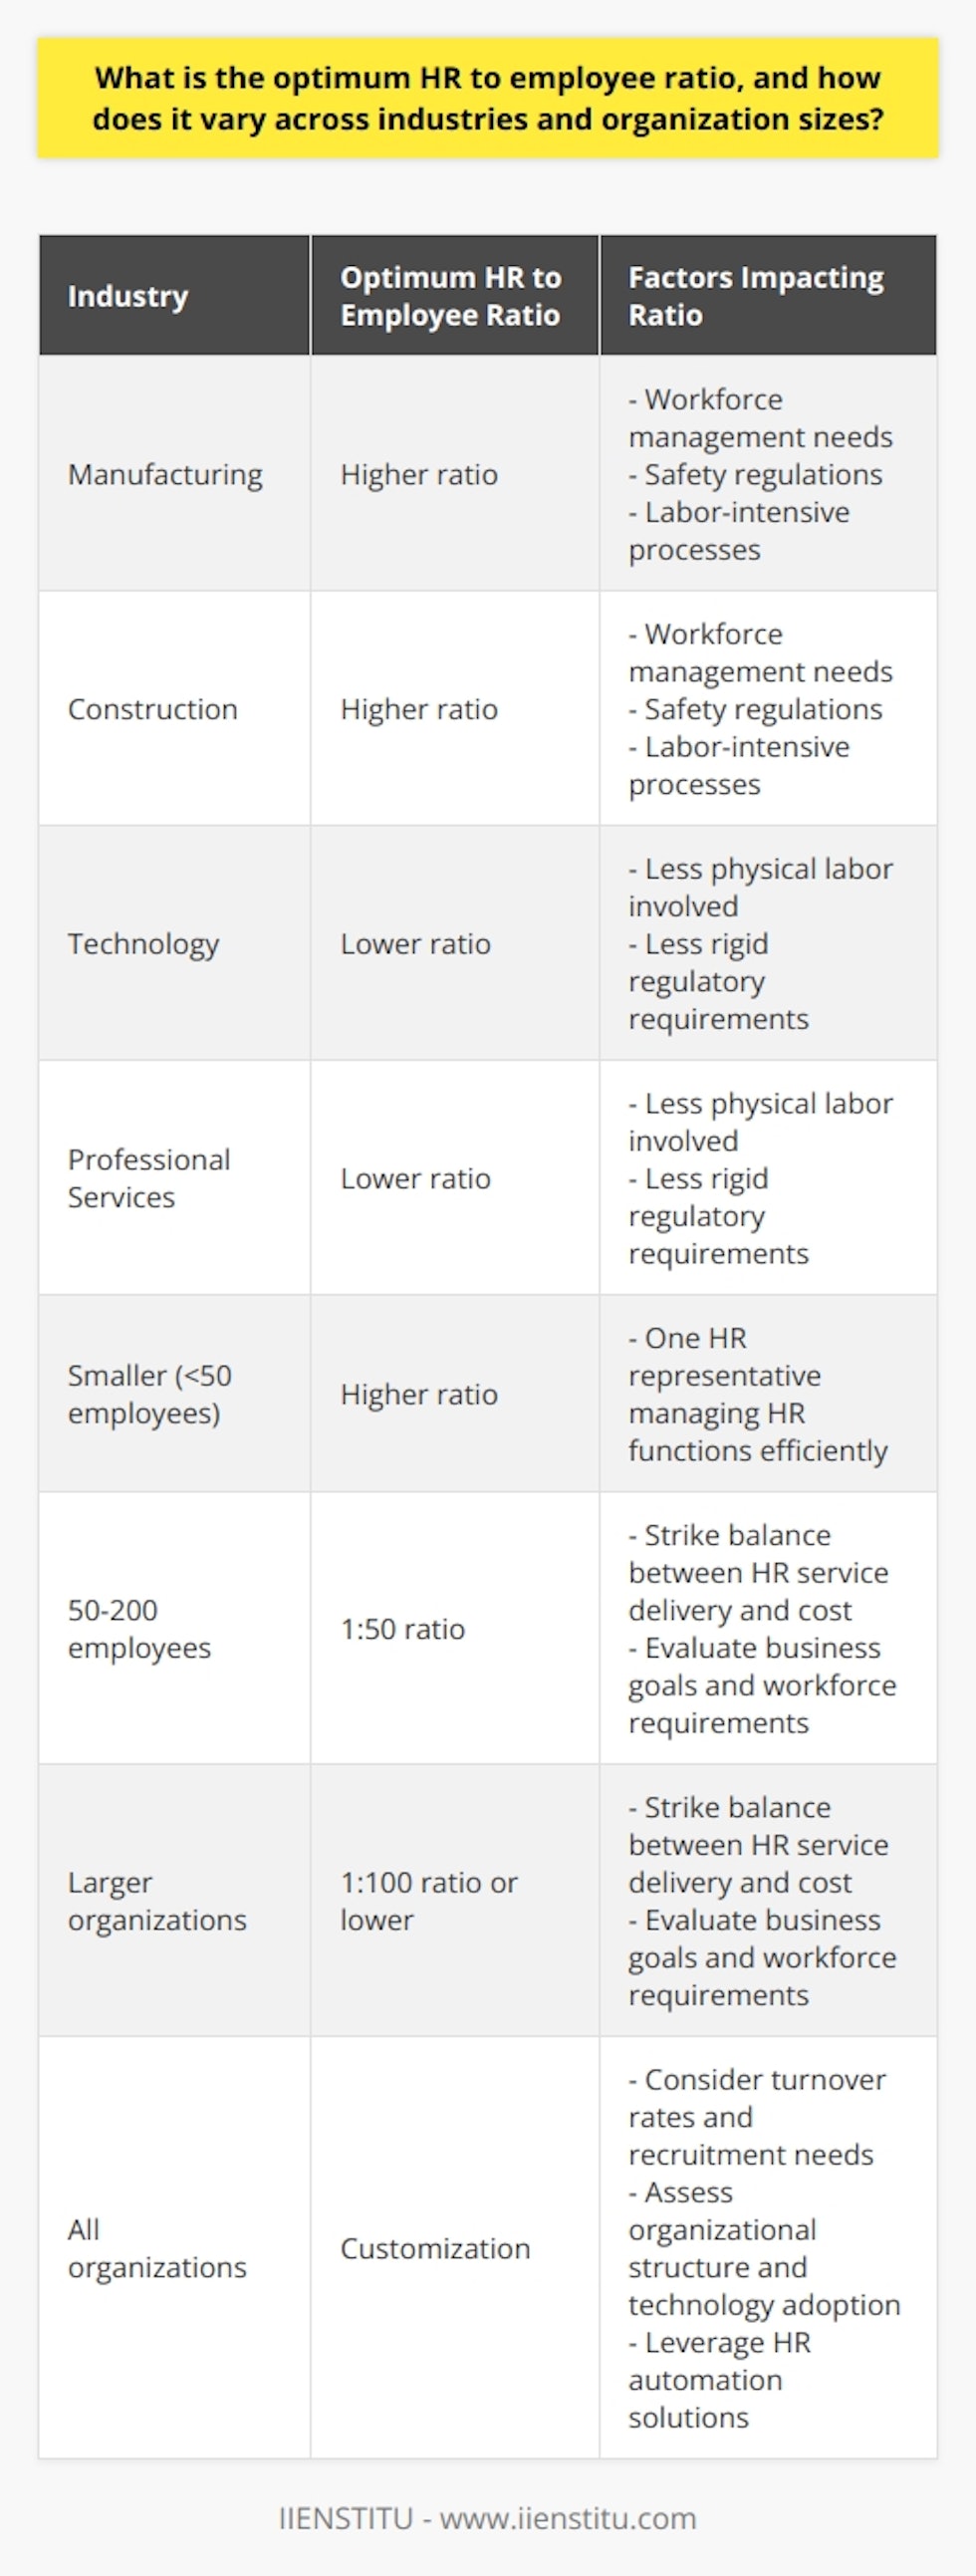 The optimum HR to employee ratio is a crucial aspect of organizational efficiency. This ratio refers to the number of HR staff members per employee within an organization. While there isn't a one-size-fits-all approach, various factors influence the optimal ratio, including industry and organization size.Different industries have unique HR requirements. For industries like manufacturing or construction, a higher HR to employee ratio is often needed due to the need for workforce management, safety regulations, and labor-intensive processes. On the other hand, industries like technology or professional services may require a lower ratio, as they involve less physical labor and have less rigid regulatory requirements.The size of the organization also plays a significant role. In smaller organizations with fewer than 50 employees, a higher HR to employee ratio may be sufficient, with one HR representative managing HR functions efficiently. However, as organizations grow and cross the 50-employee threshold, the ratio is likely to decrease. For instance, organizations with 50 to 200 employees may require a ratio of 1:50, while larger organizations may demand a 1:100 ratio or even lower. Striking a balance between effective HR service delivery and minimizing HR personnel costs is crucial.Customizing the ratio is important. Each organization should consider its unique business goals, culture, and workforce requirements. High turnover companies may need more HR staff to manage recruitment and onboarding processes. Organizational structure, technology adoption, and HR automation also affect the optimal ratio. Technology solutions that automate HR processes and streamline key functions can reduce the need for additional HR staff.In conclusion, the optimum HR to employee ratio varies across industries and organization sizes. It is important for organizations to assess their specific requirements and adjust their ratio accordingly to improve HR service delivery, employee satisfaction, and overall success.